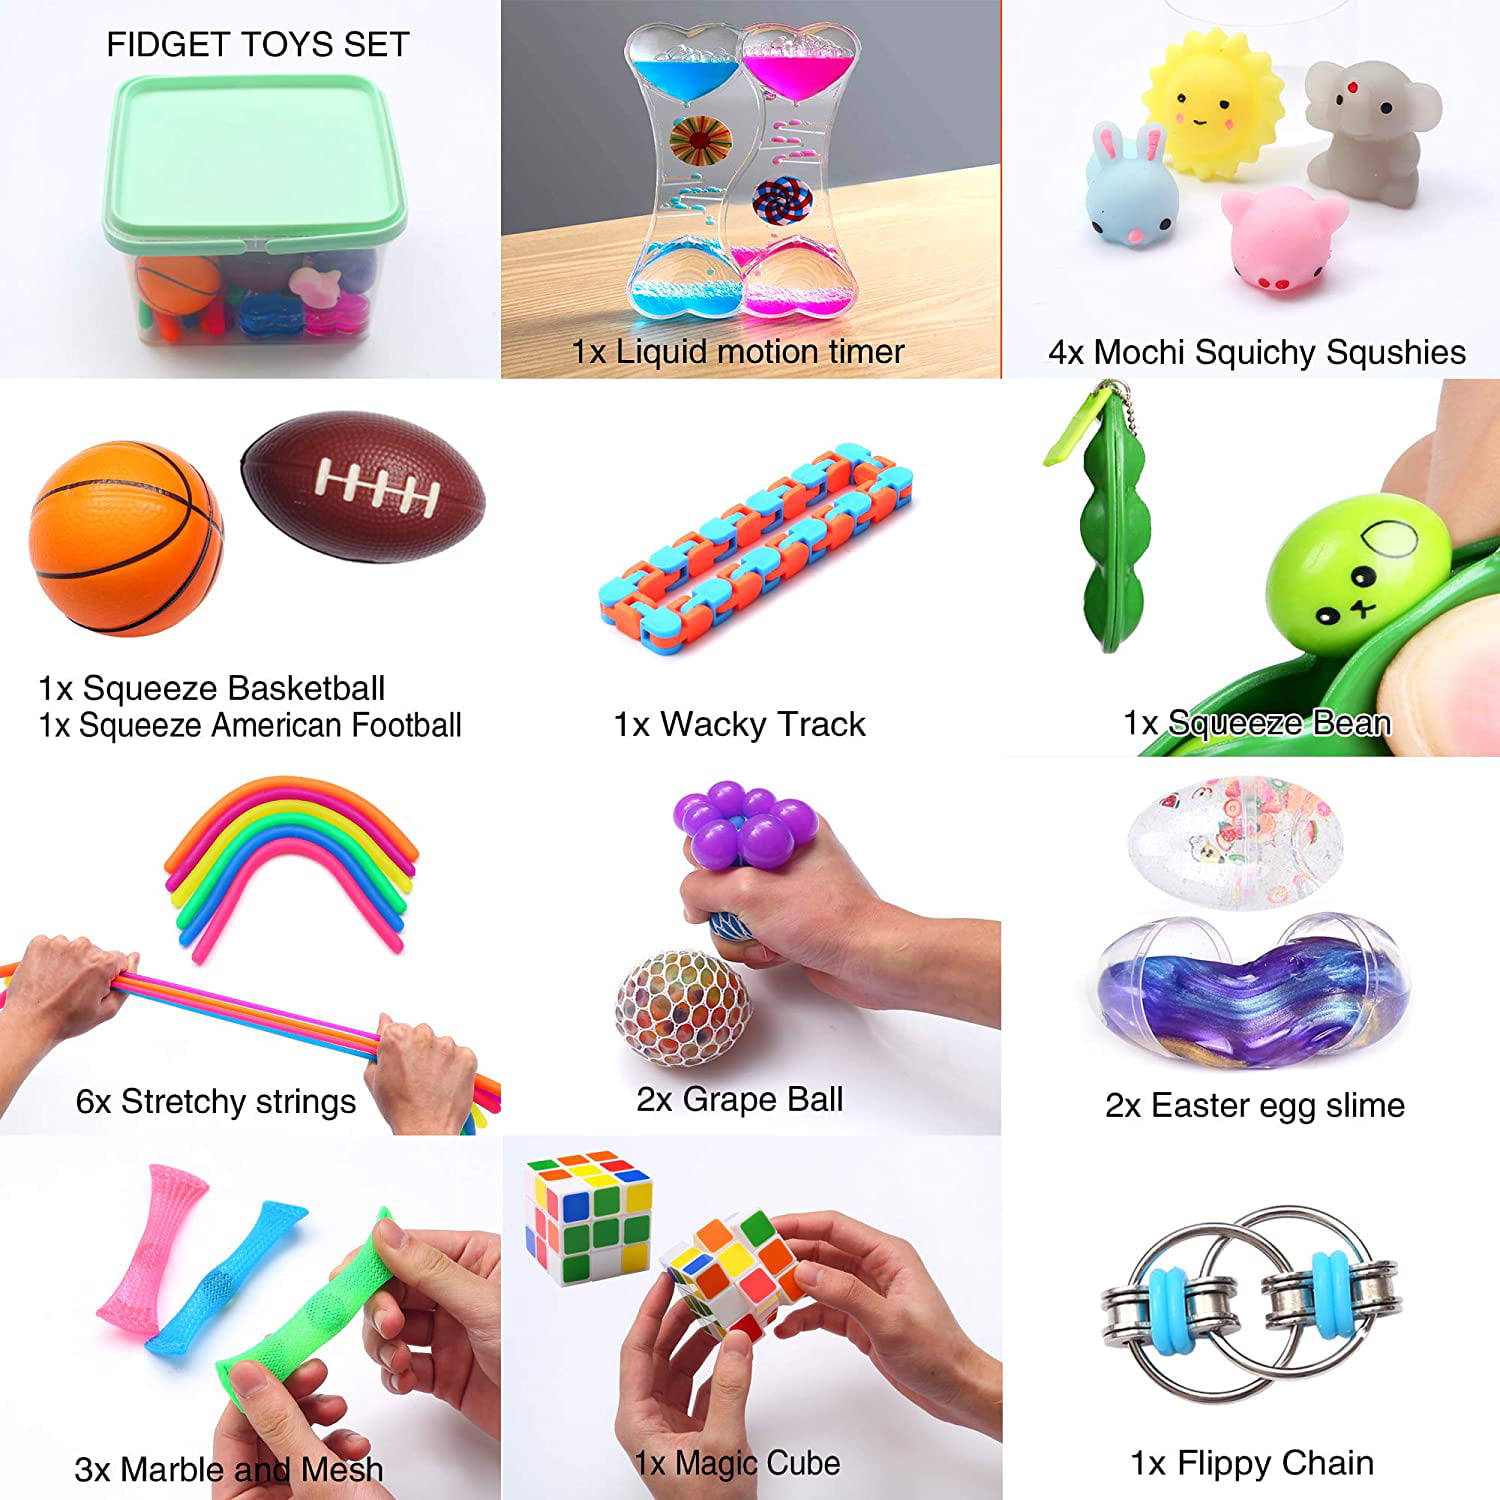 Push Bubble Pop Fidget Toy Set Stress Relief Novelty Fidget Pack for Kids Adults for Relaxing Therapy Sensory Fidget Toys Set 24 Pack Perfect for ADHD ADD Anxiety Autism 18pcs Fidget Packs 1 